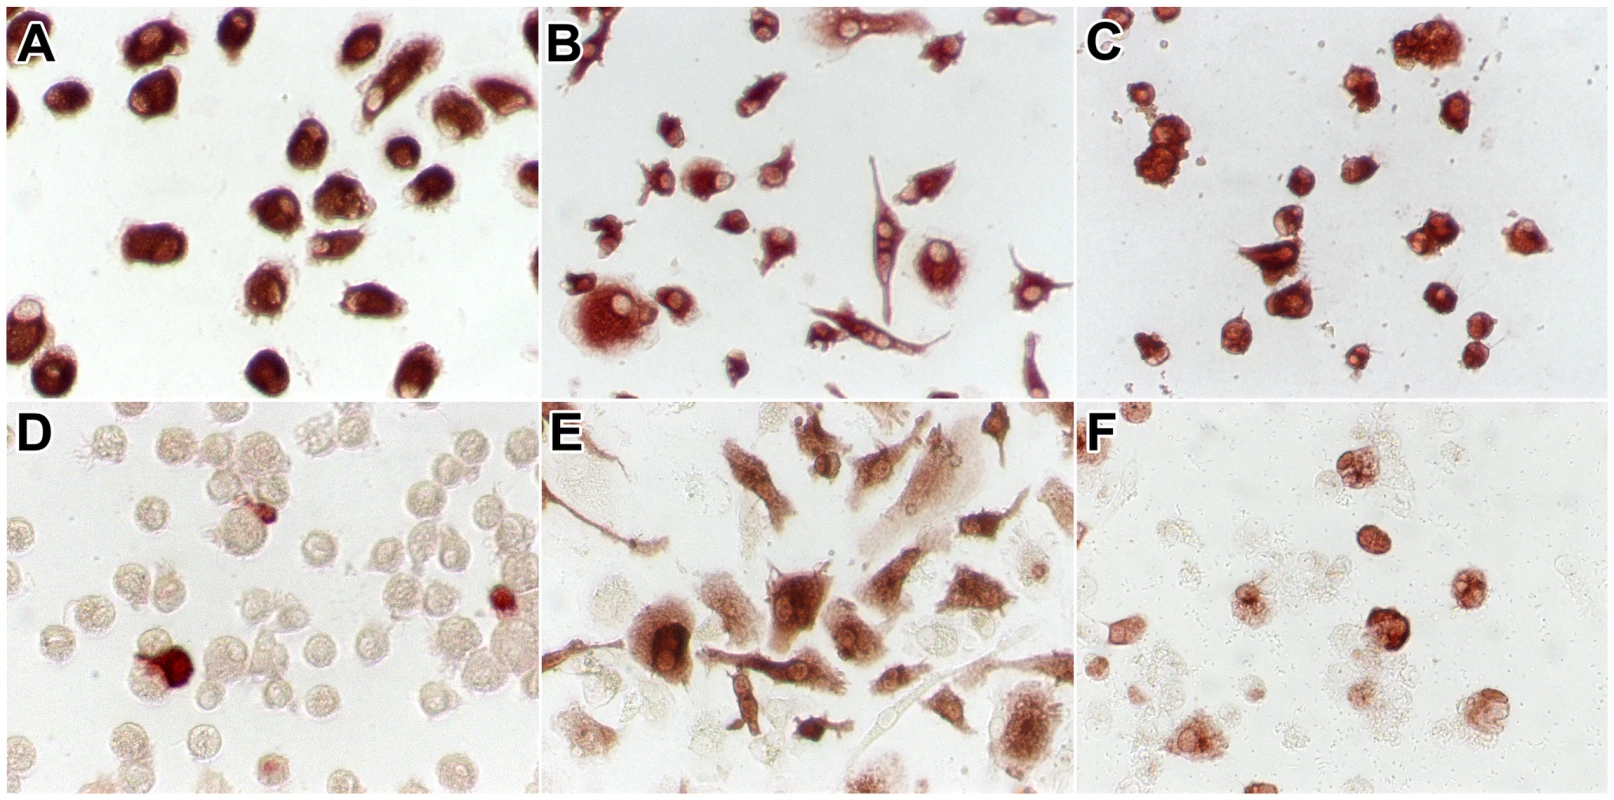 CD68 and influenza A virus antigen expression in alveolar macrophages and macrophages cultured from monocytes.